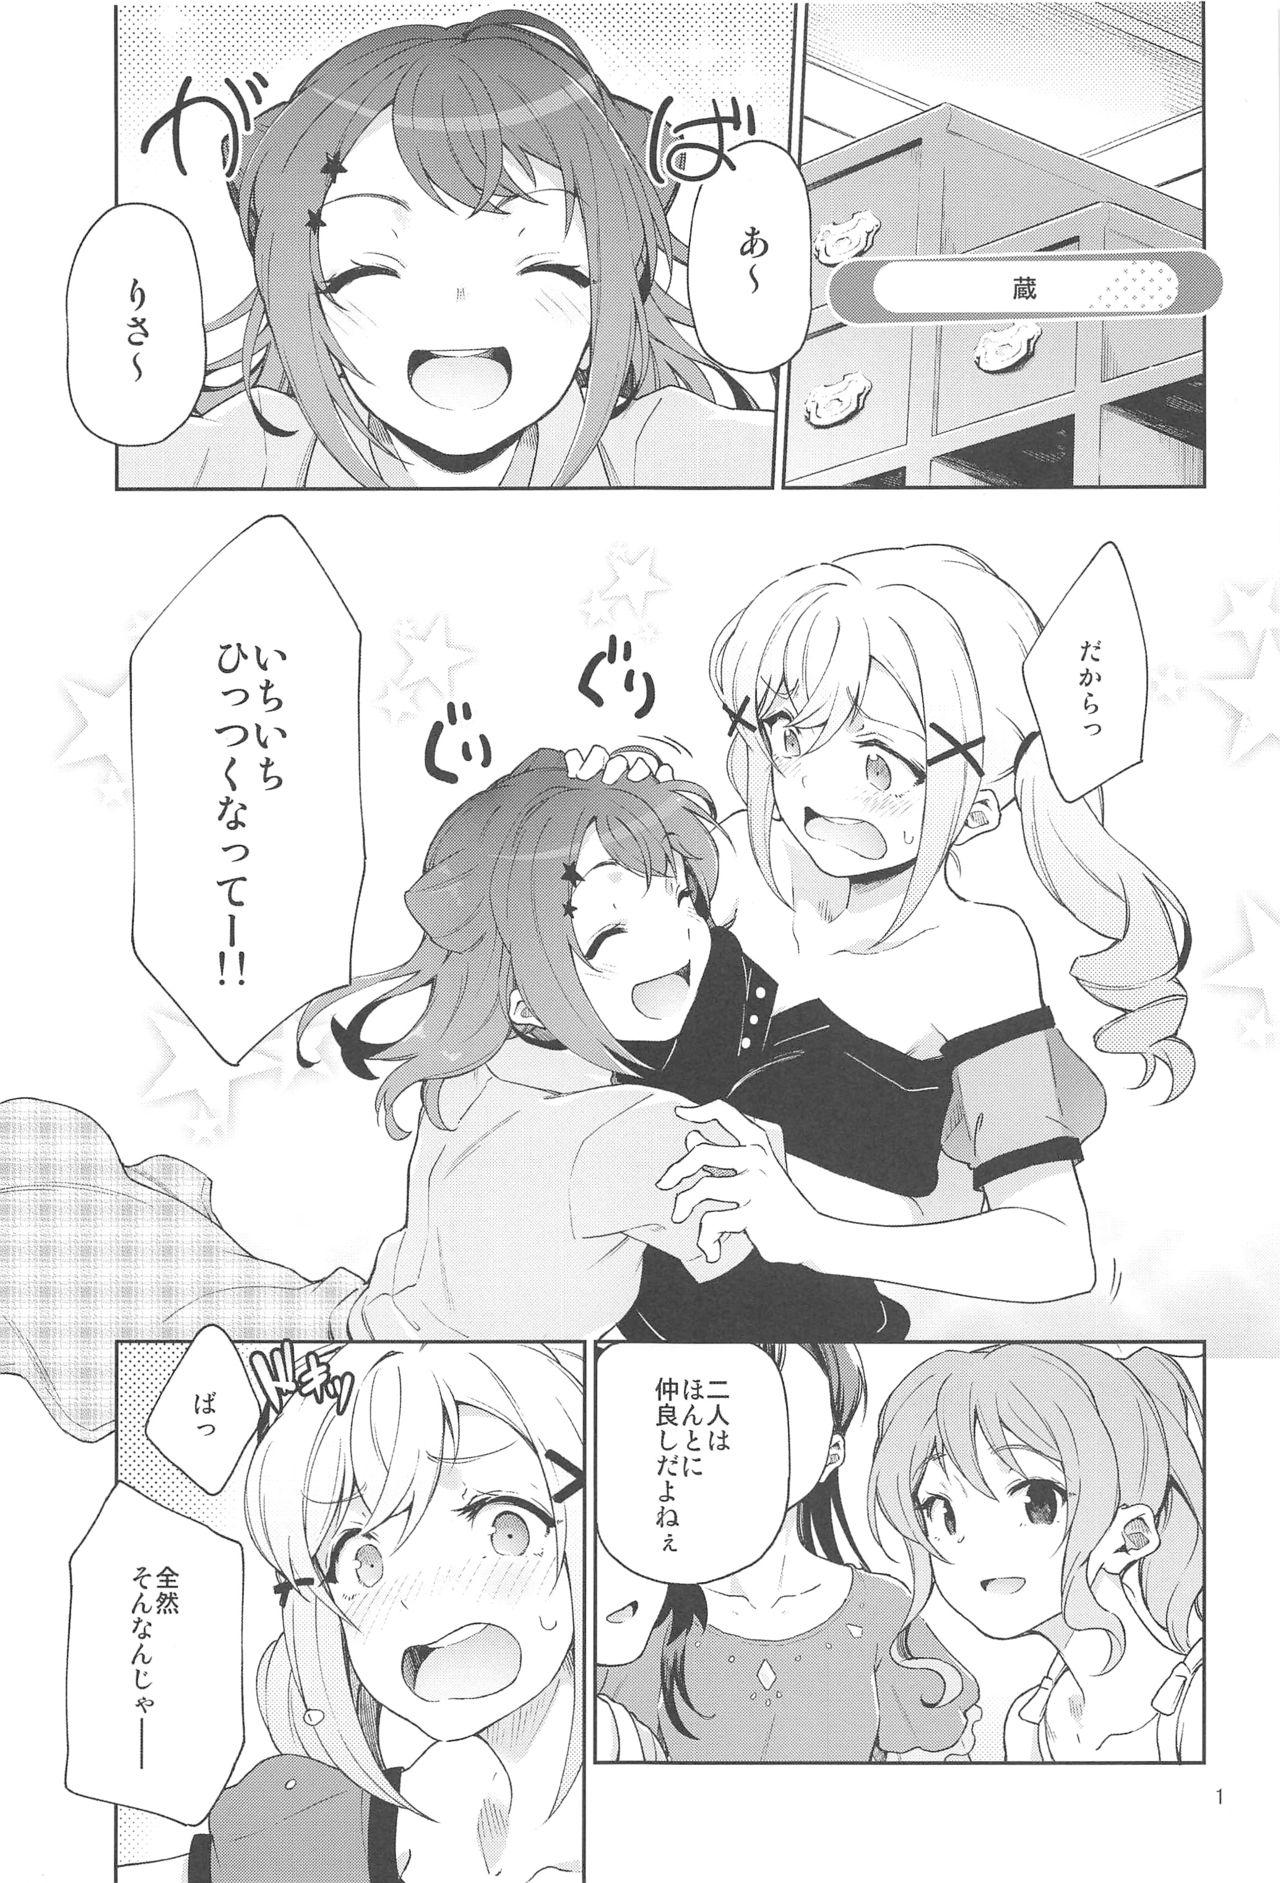 Hot Fuck Jealousy All Night - Bang dream Female Domination - Page 2